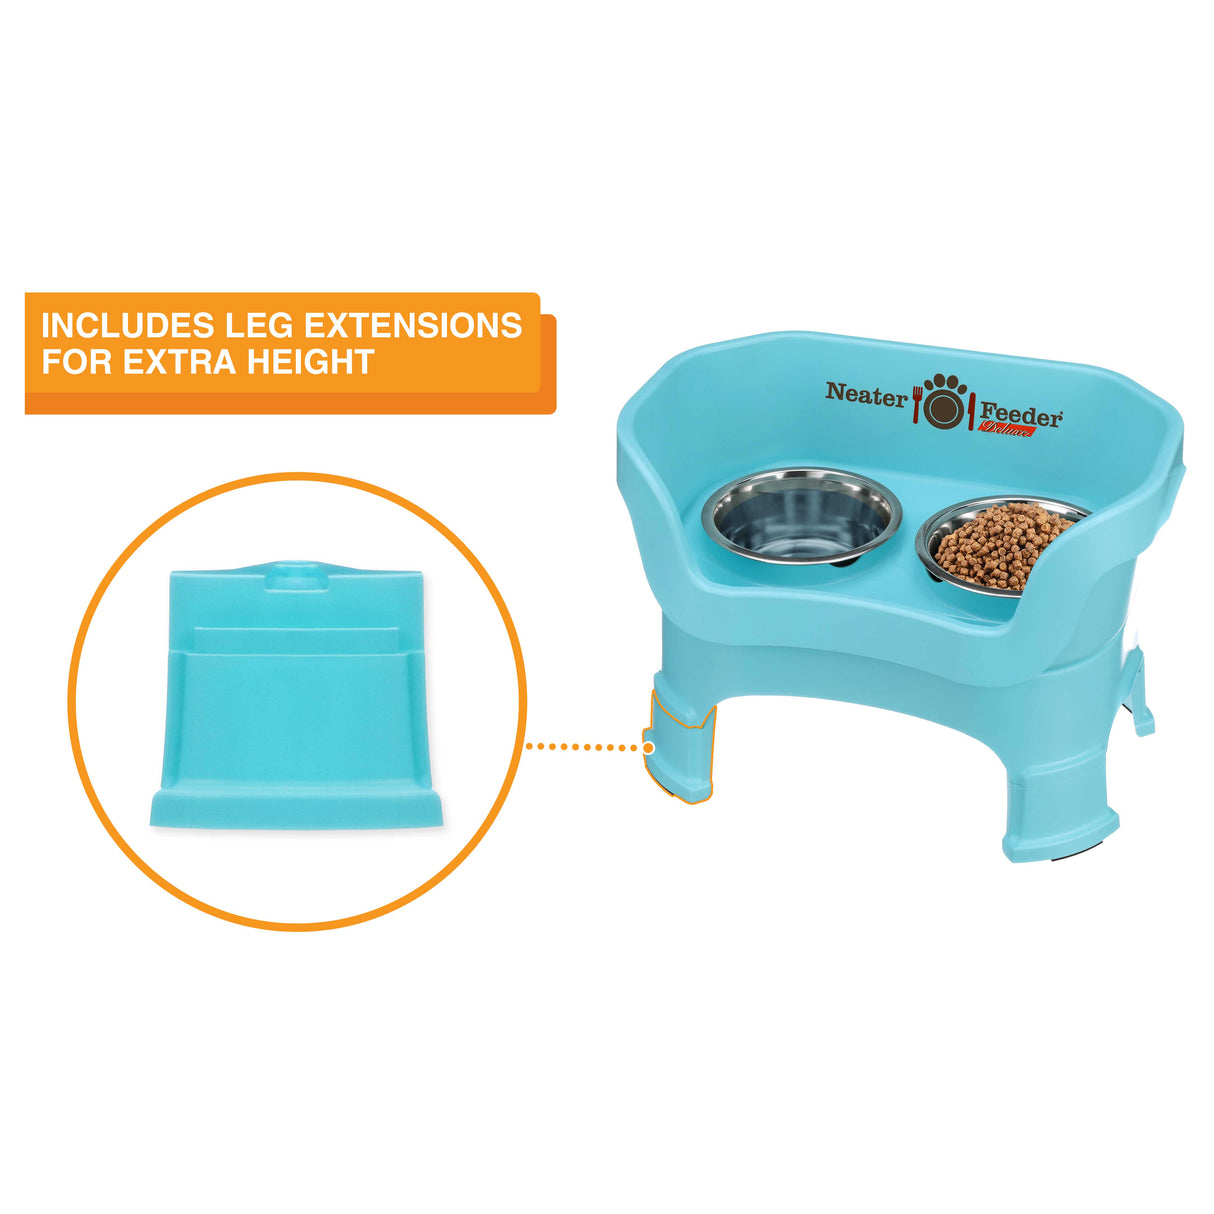 This Neater Feeder includes removeable leg extensions